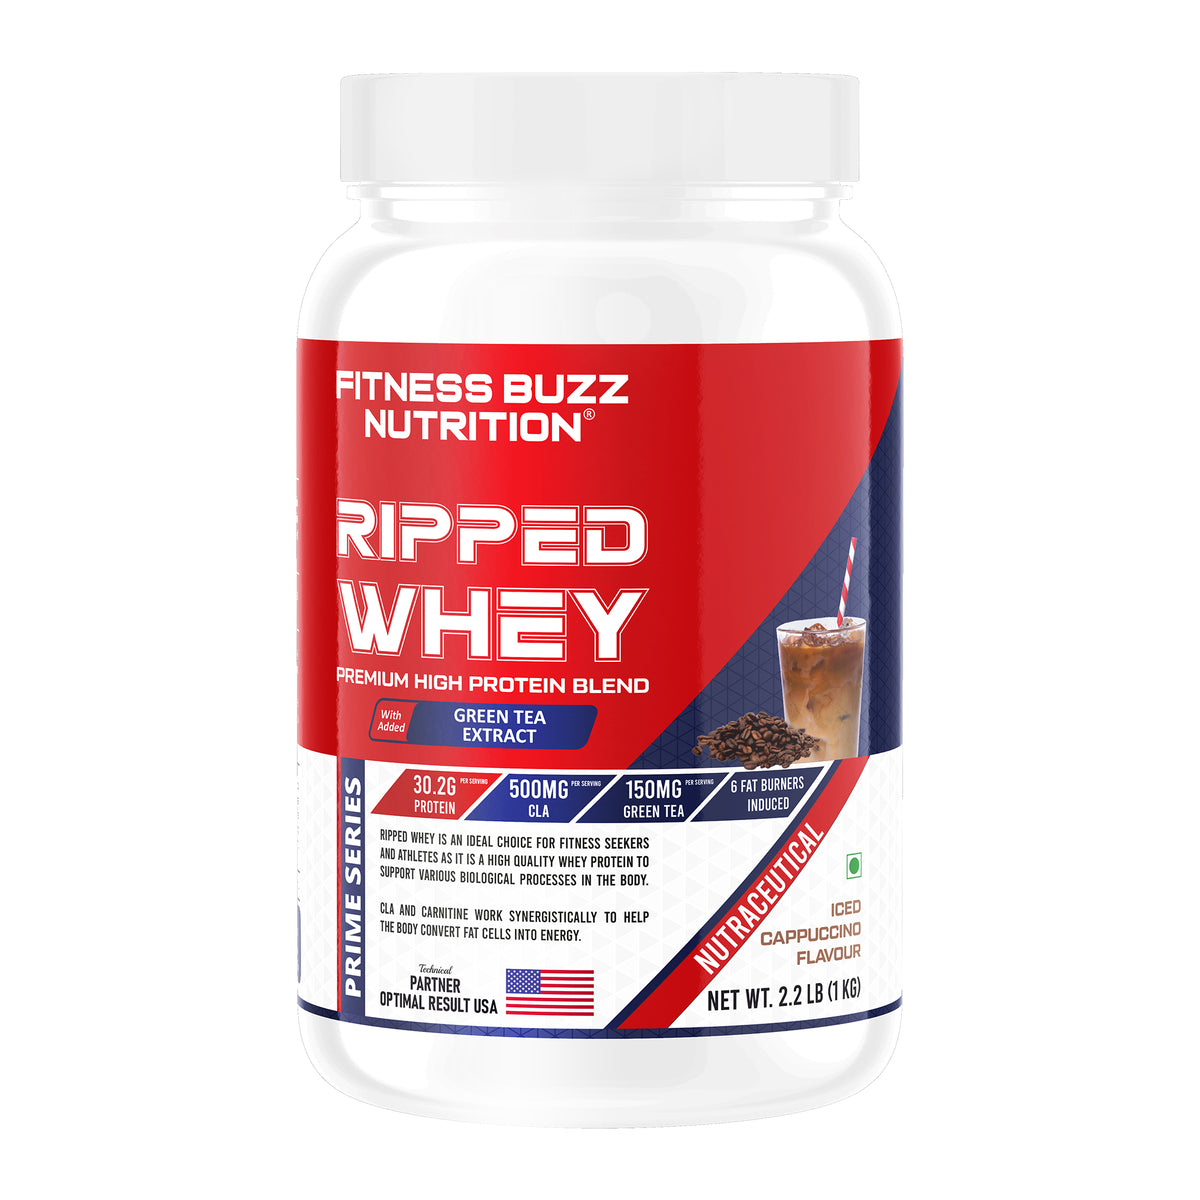 FITNESS BUZZ NUTRITION RIPPED WHEY